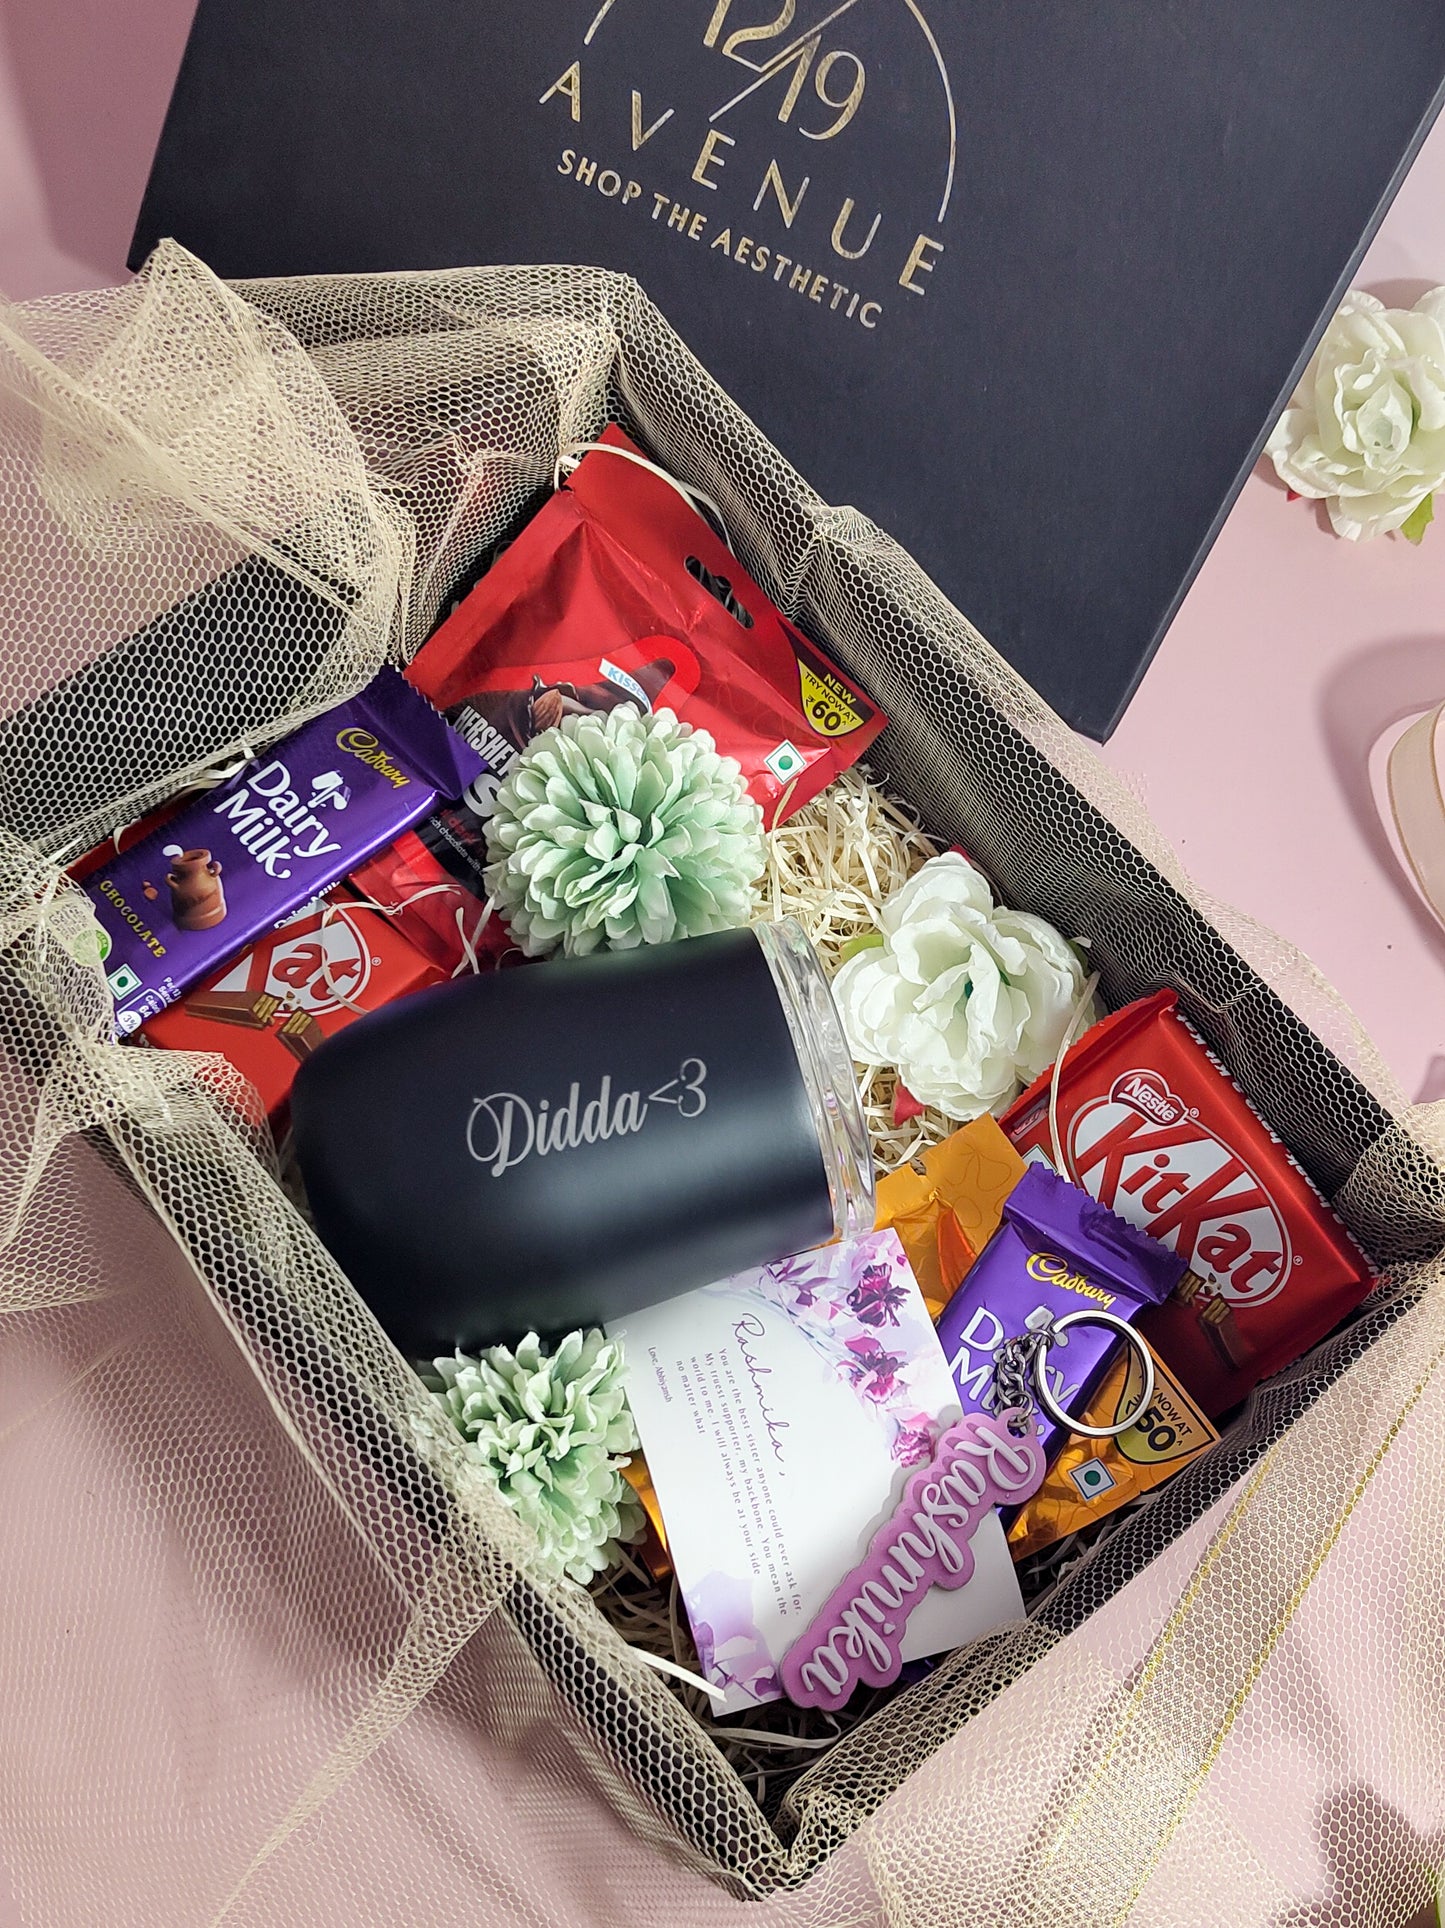 The Sweet Tooth Personalized Gifting Hamper